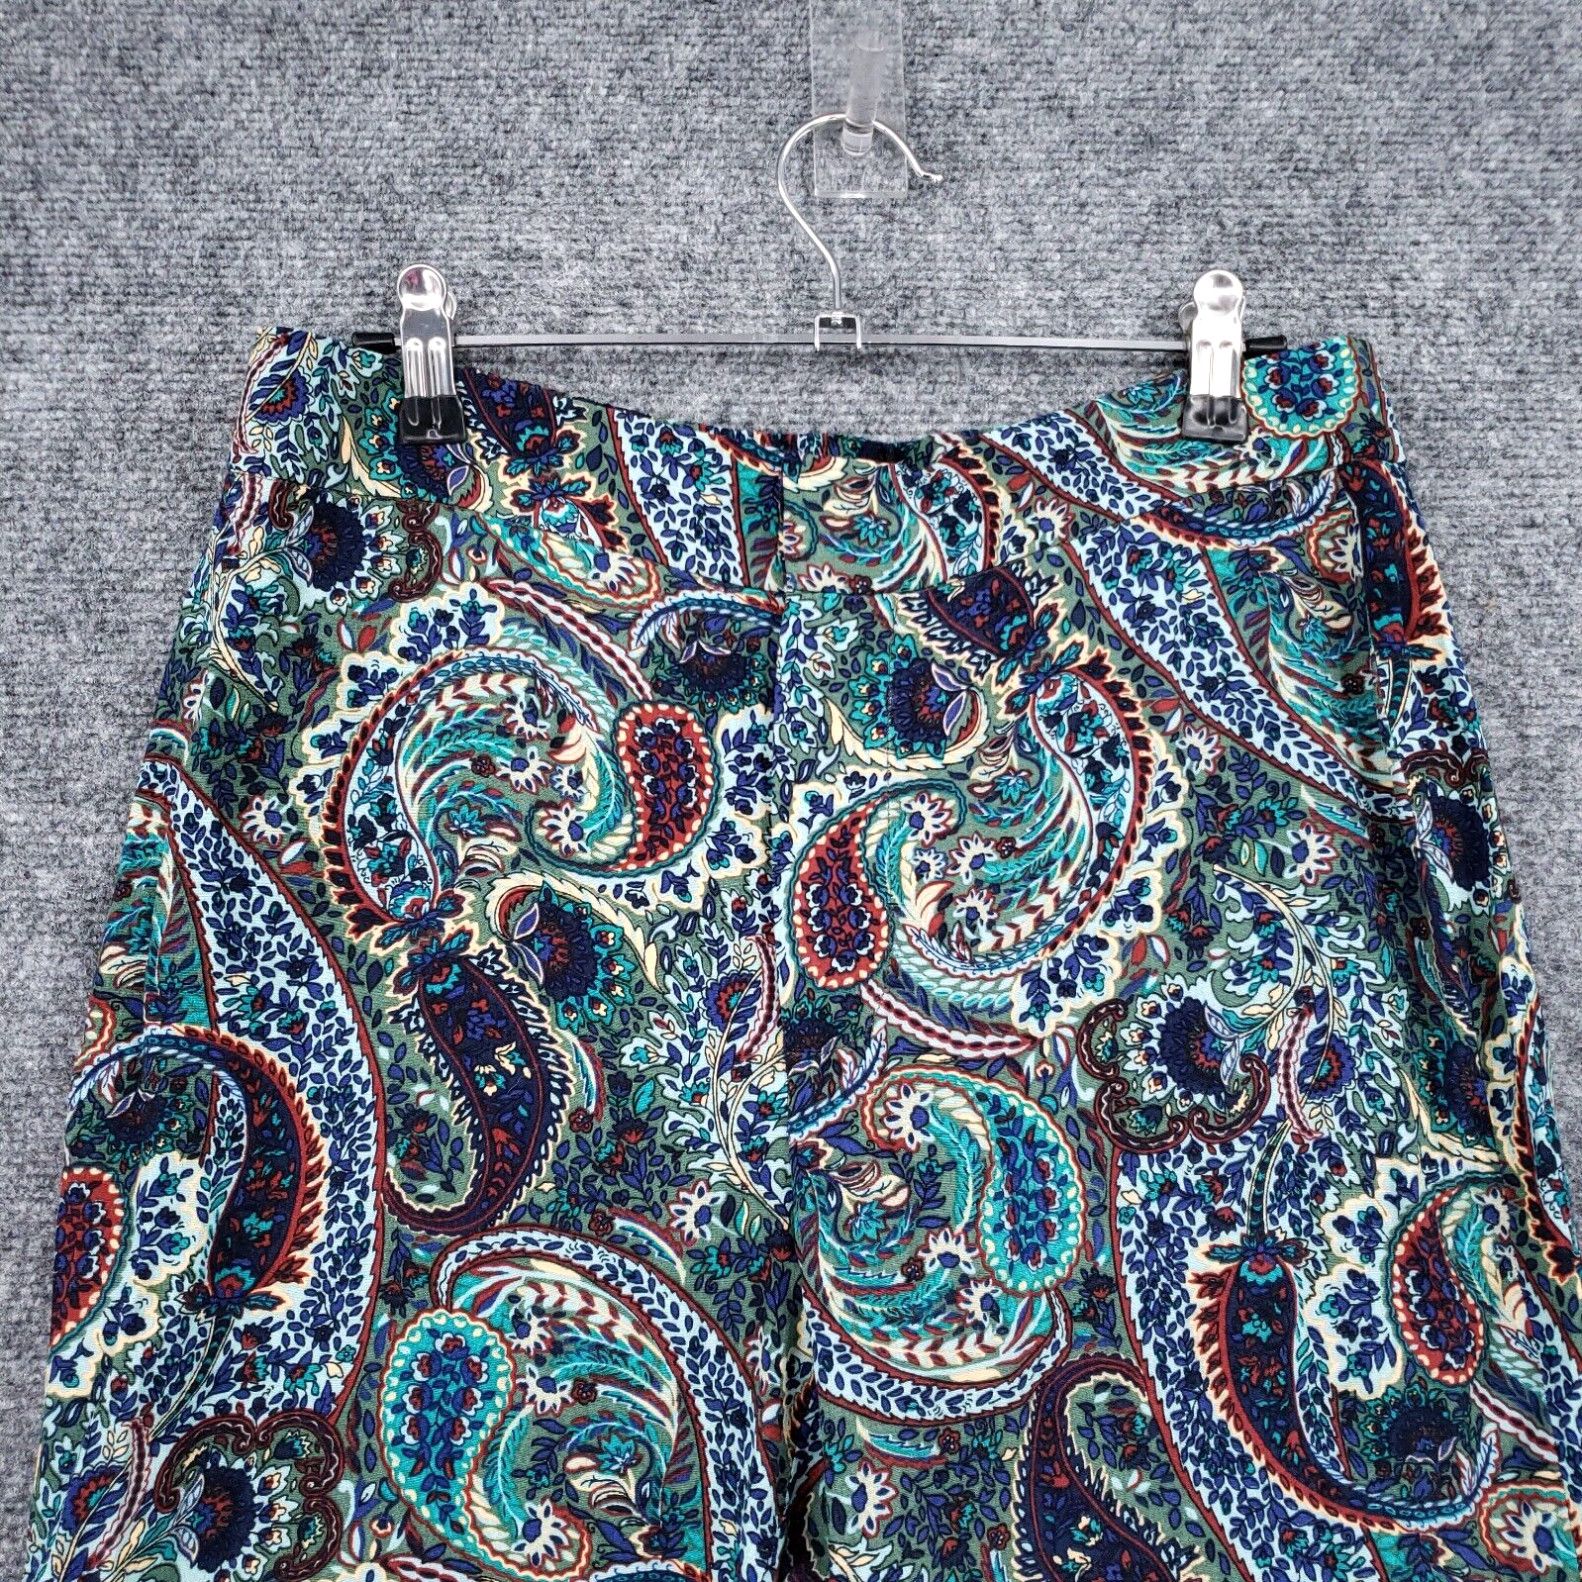 Zara Zara Pants Womens S Small Green Floral Paisley Flared Hi Rise Bell Bottom 90s Size ONE SIZE - 3 Thumbnail